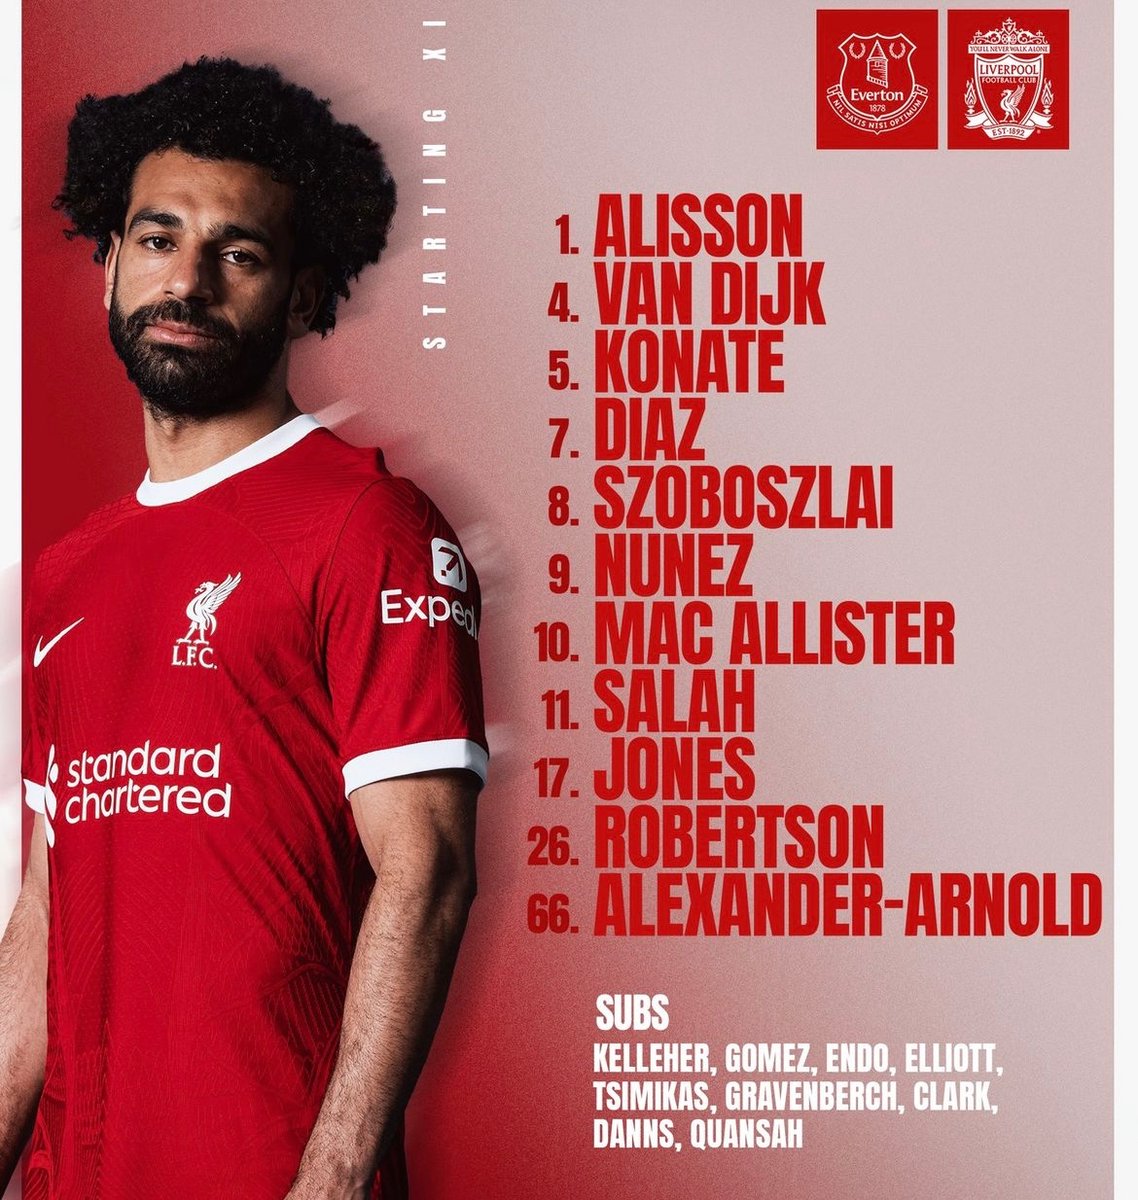 @TheAnfieldWrap Look at Mo. He knew before kickoff. An absolute farce.